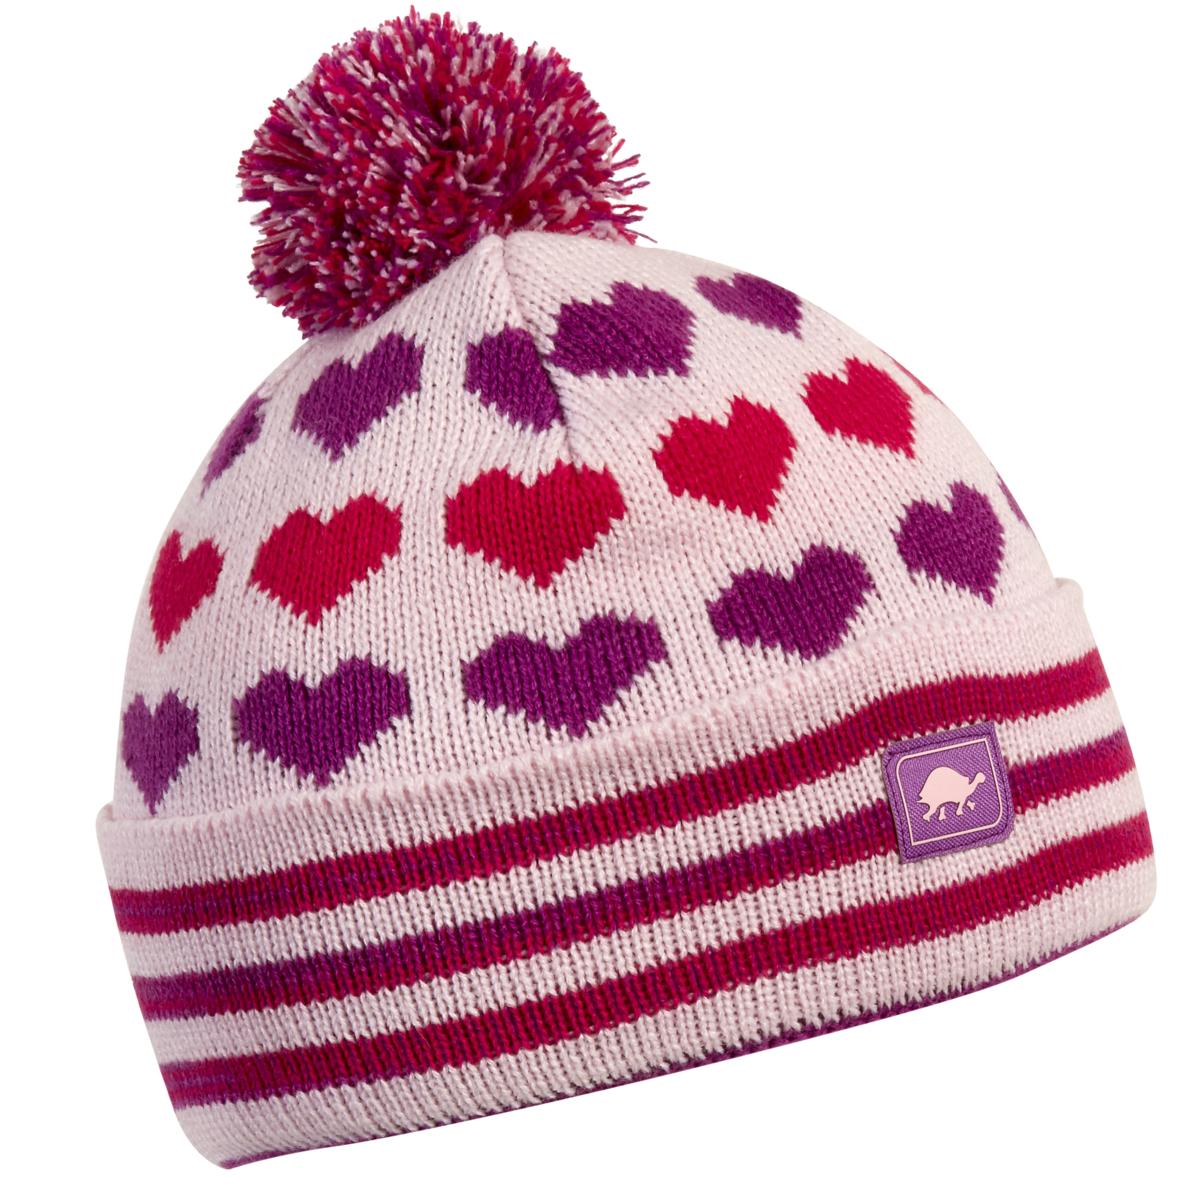 Turtle Fur Kids Candy Hearts Knit Winter Hat Pink